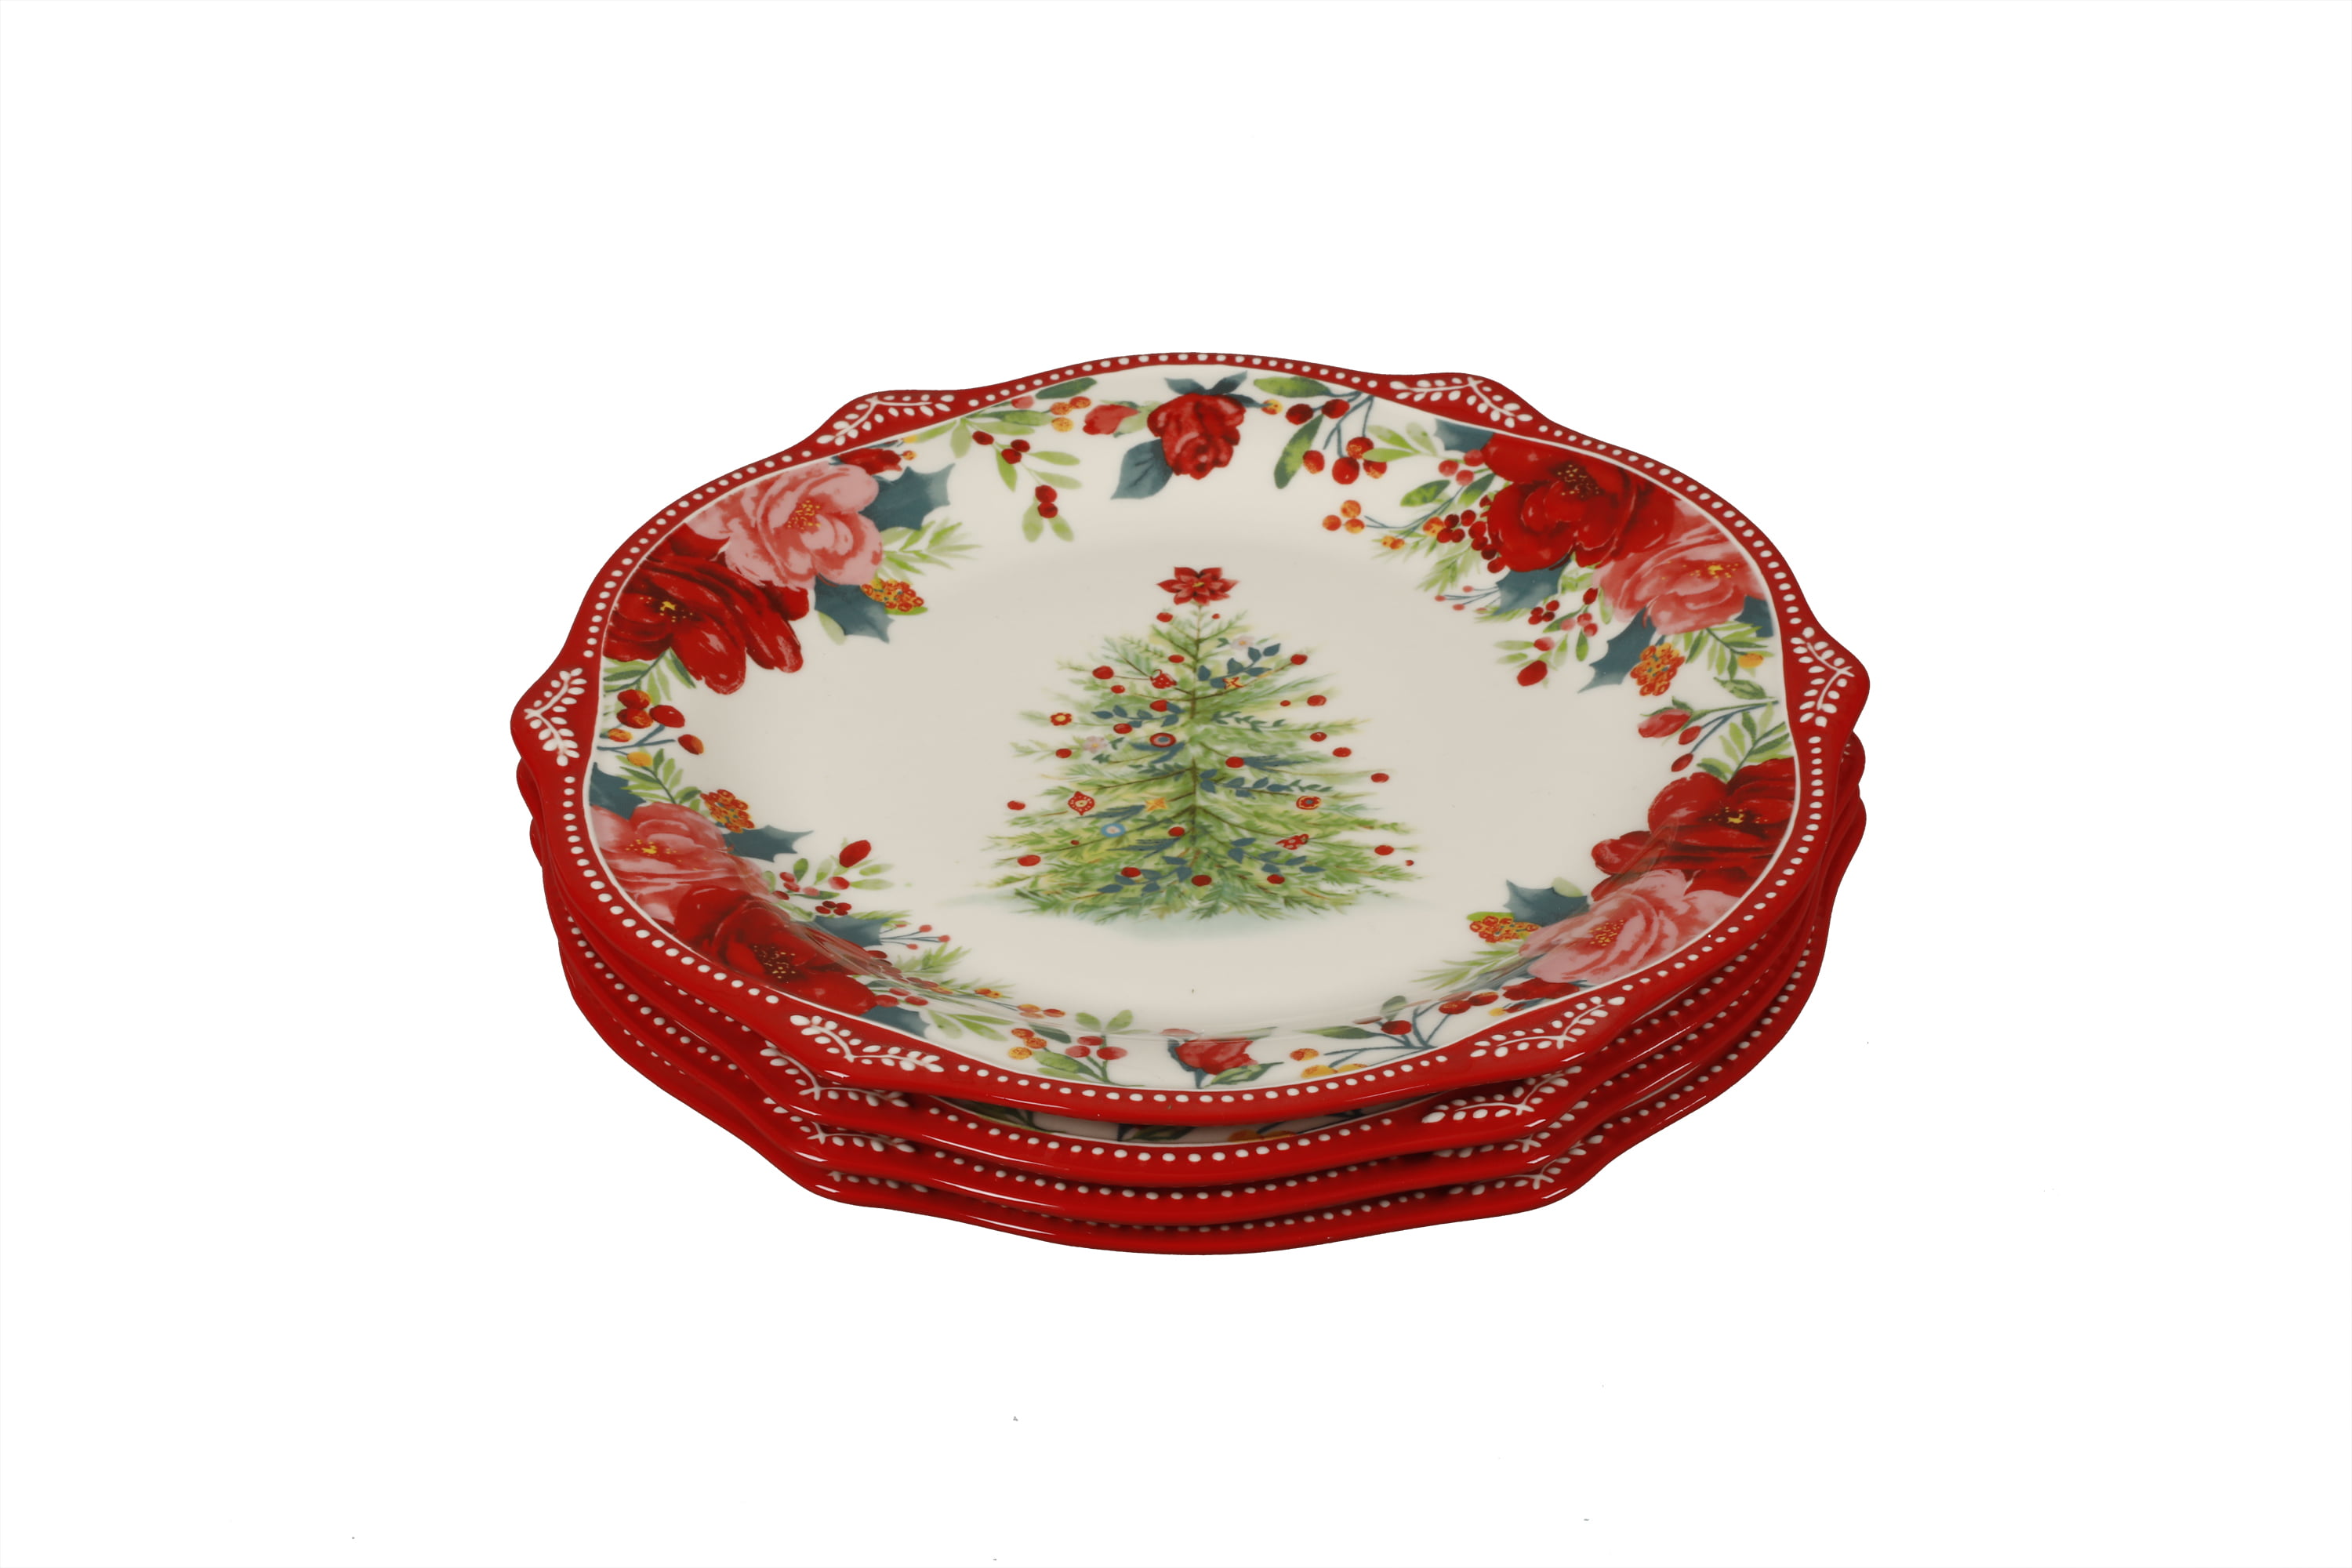 PIONEER WOMAN CHEERFUL ROSE DESIGN CHRISTMAS SHARING PLATE 12" RED Teal Set Of 2